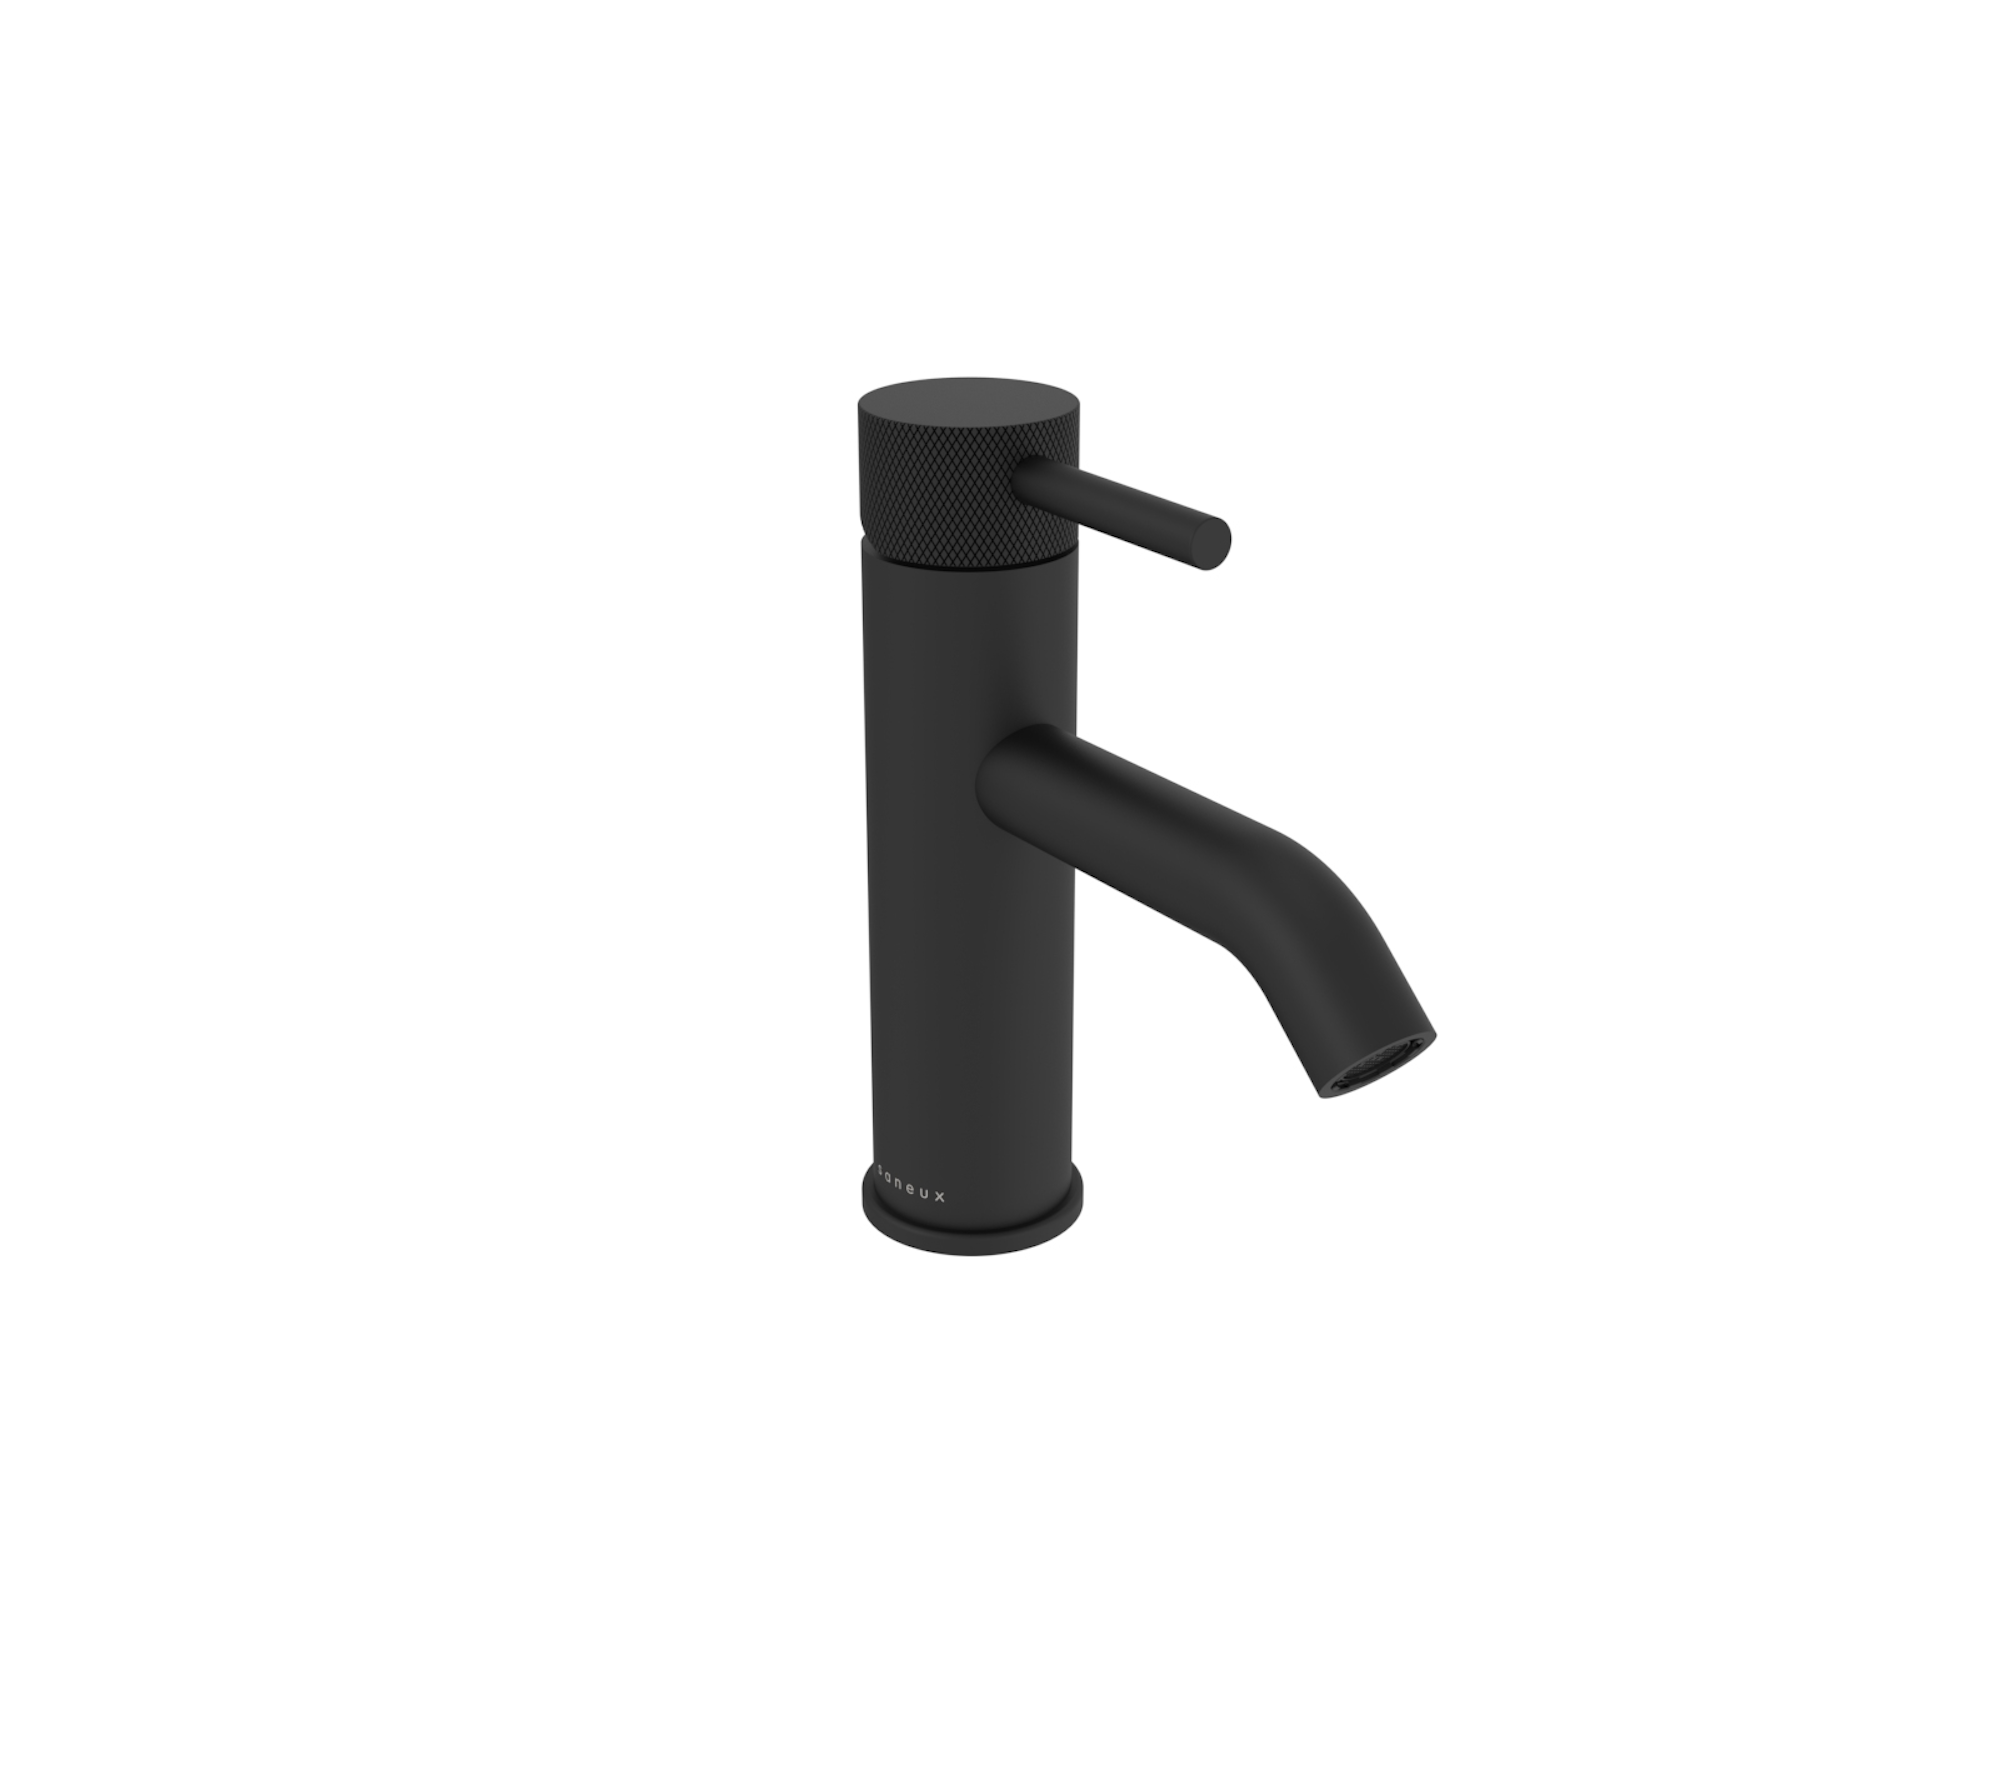 COS basin mixer with knurled handle - Matte Black